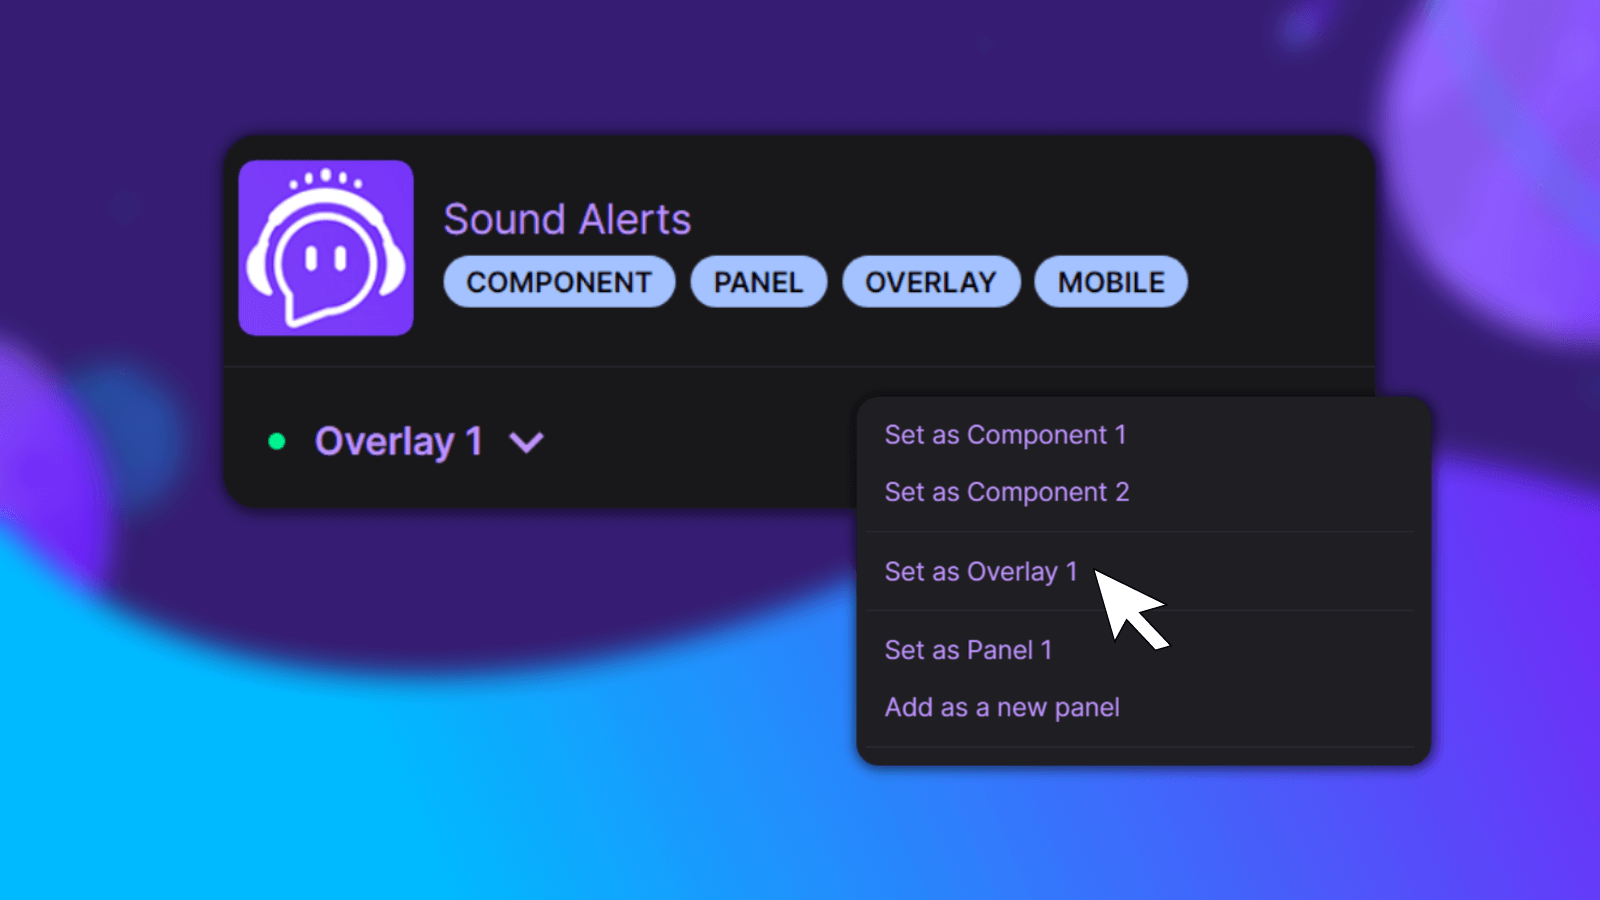 This image shows the activation process of the overlay slot for the Sound Alerts Twitch Extension.